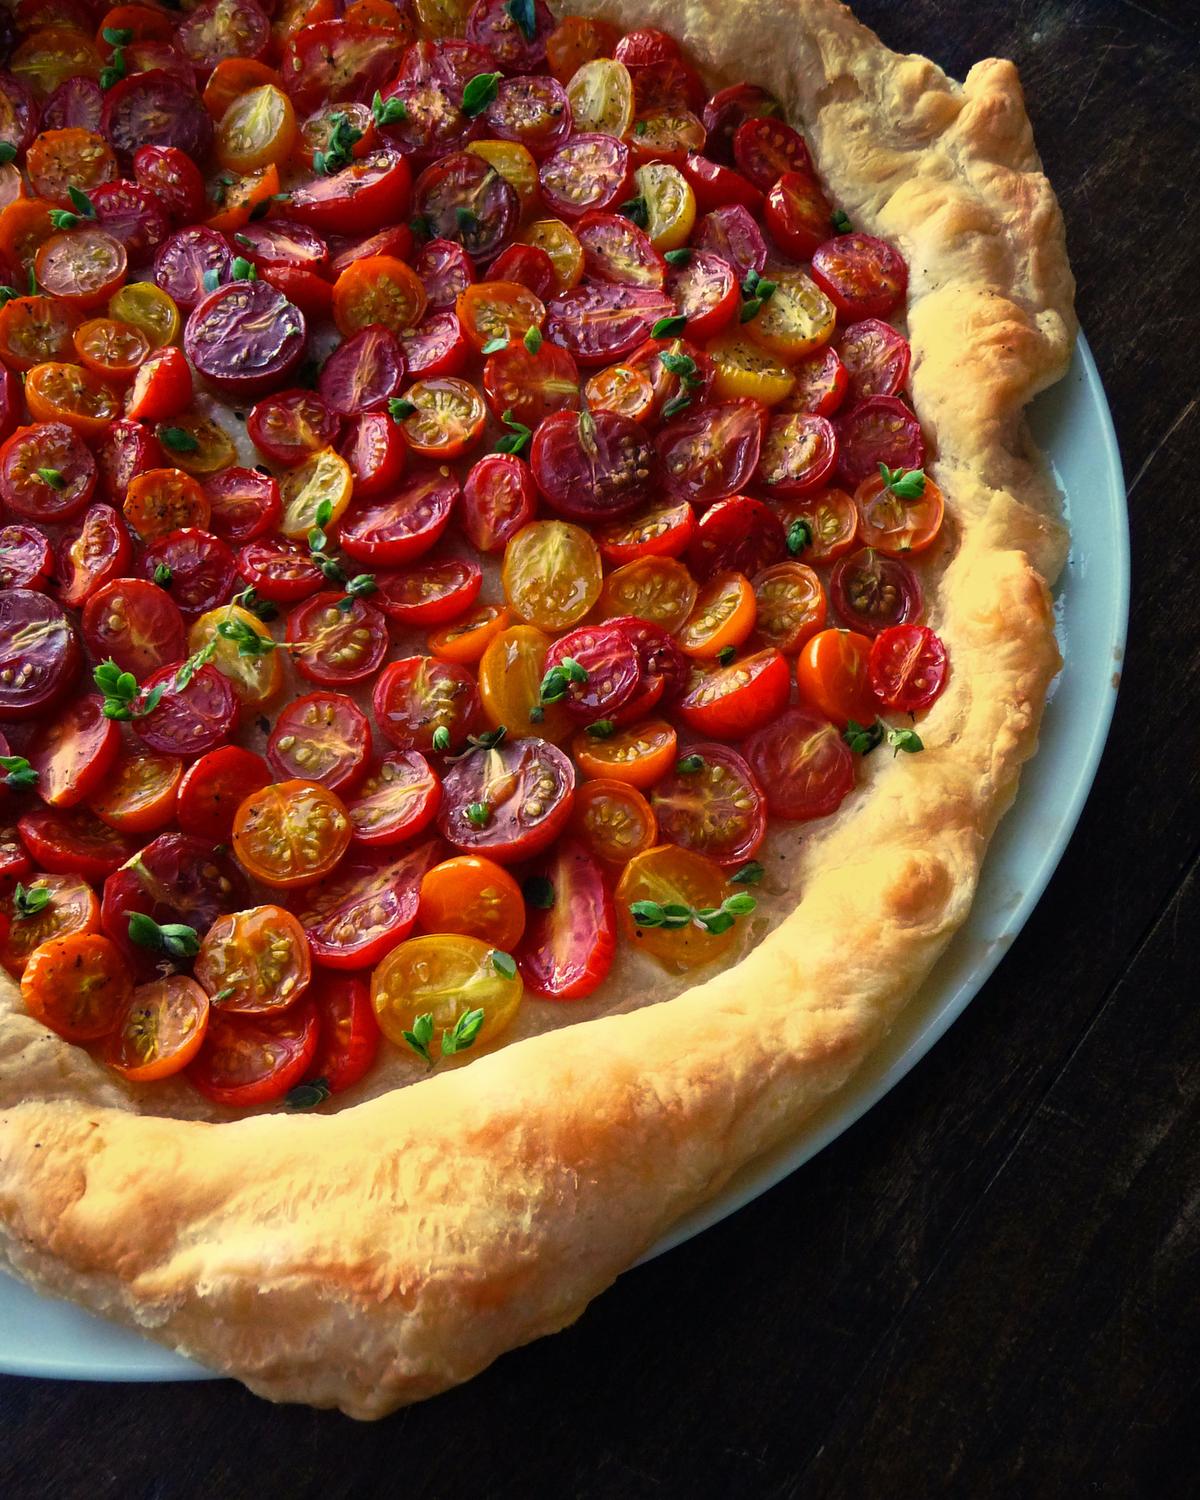 This unpretentious tart gives the sweet and juicy tomatoes center stage. (Lynda Balslev for Tastefood)